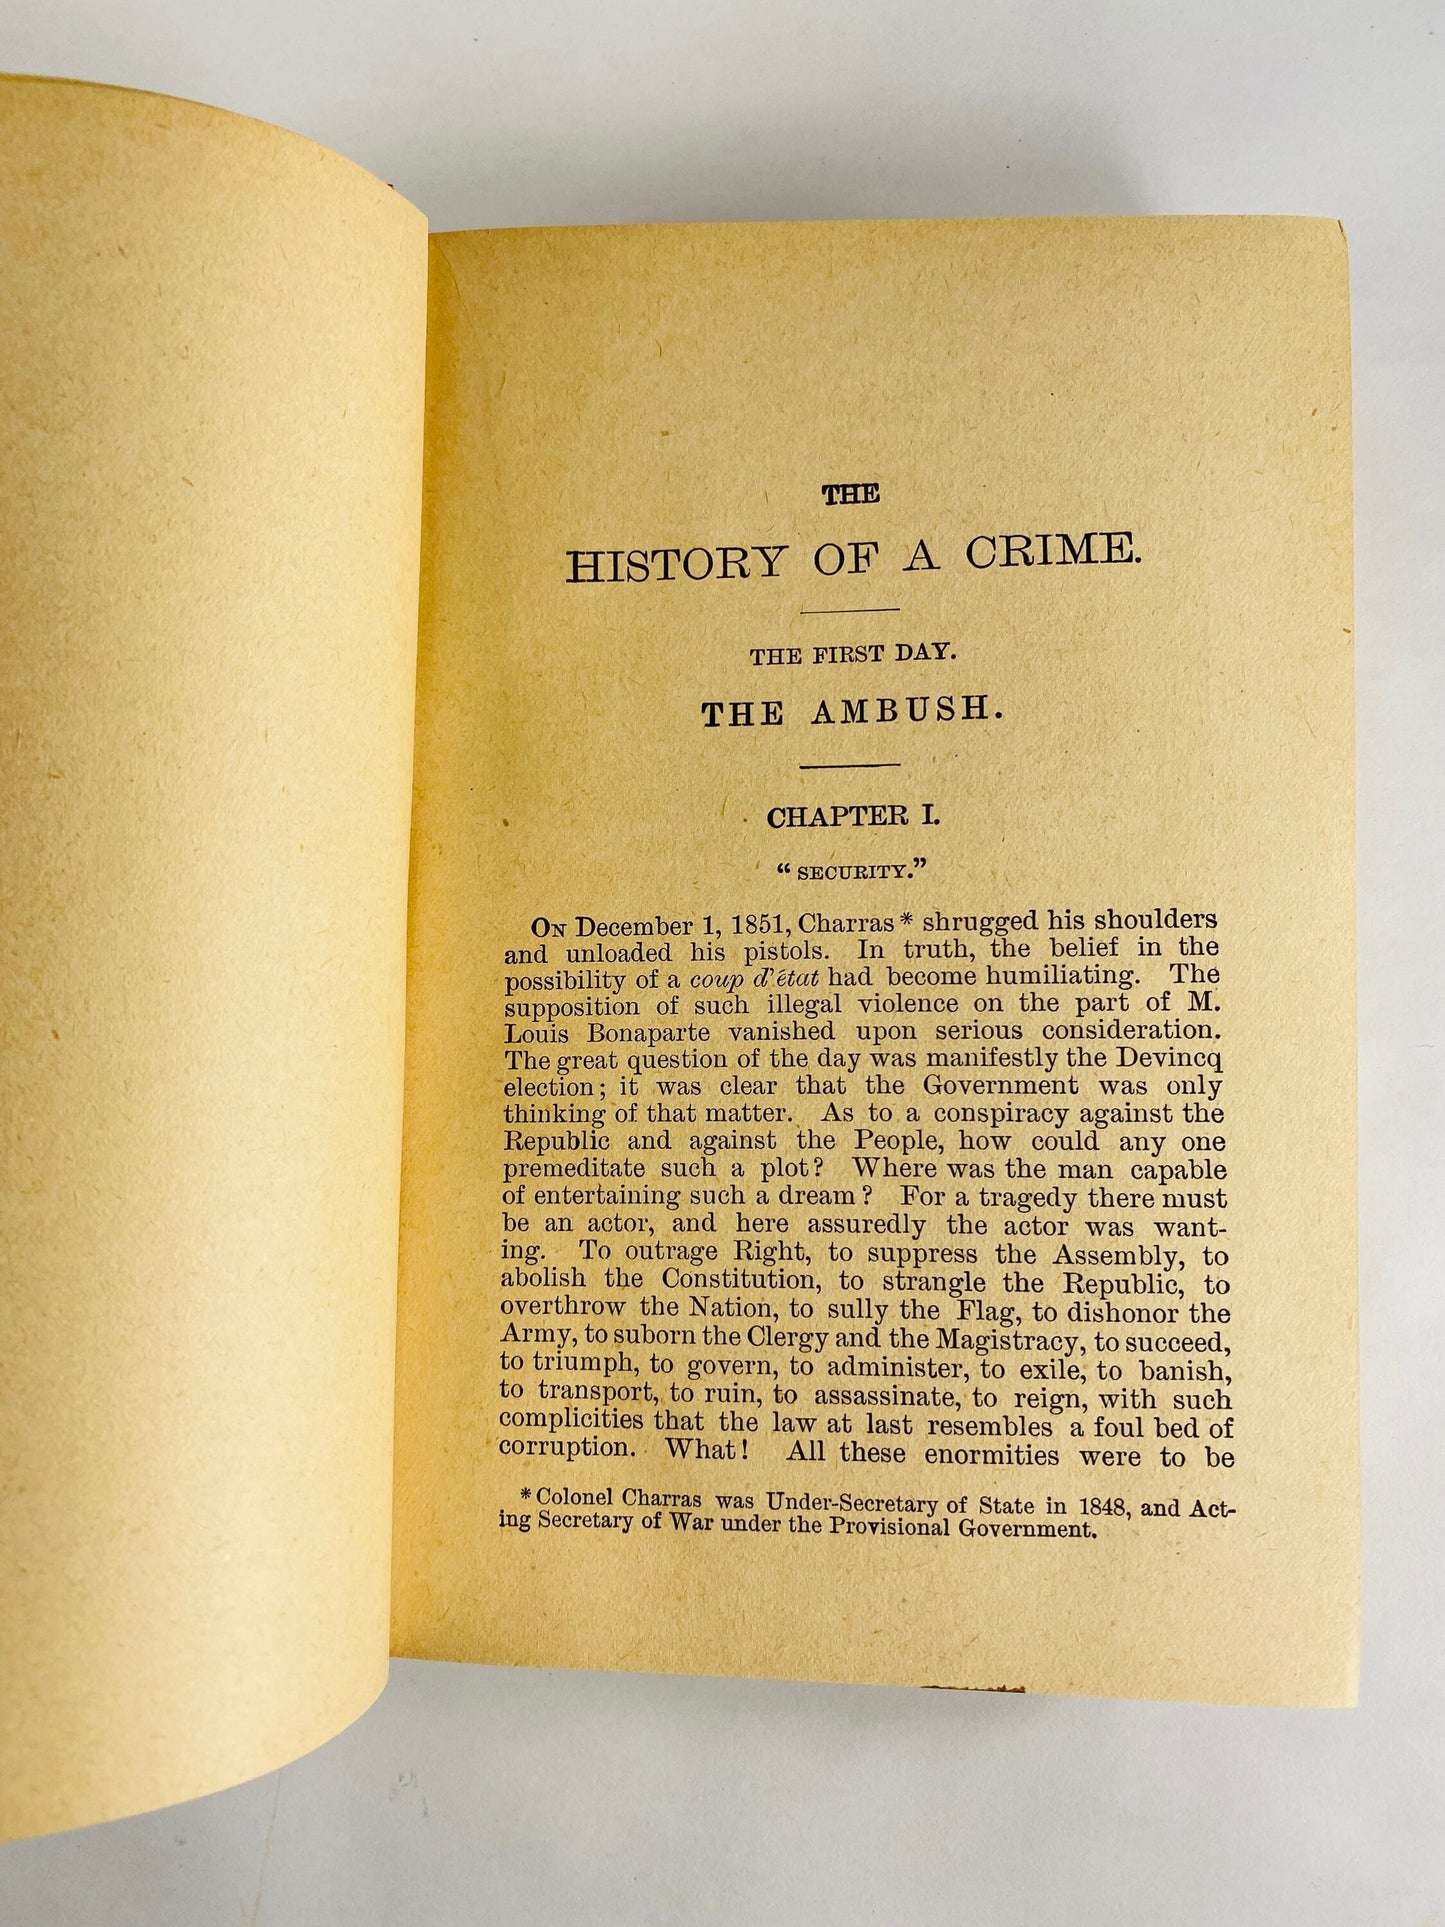 1900 History of a Crime by Victor Hugo author of Les Miserables vintage book EARLY American PRINTING Red bookshelf decor.